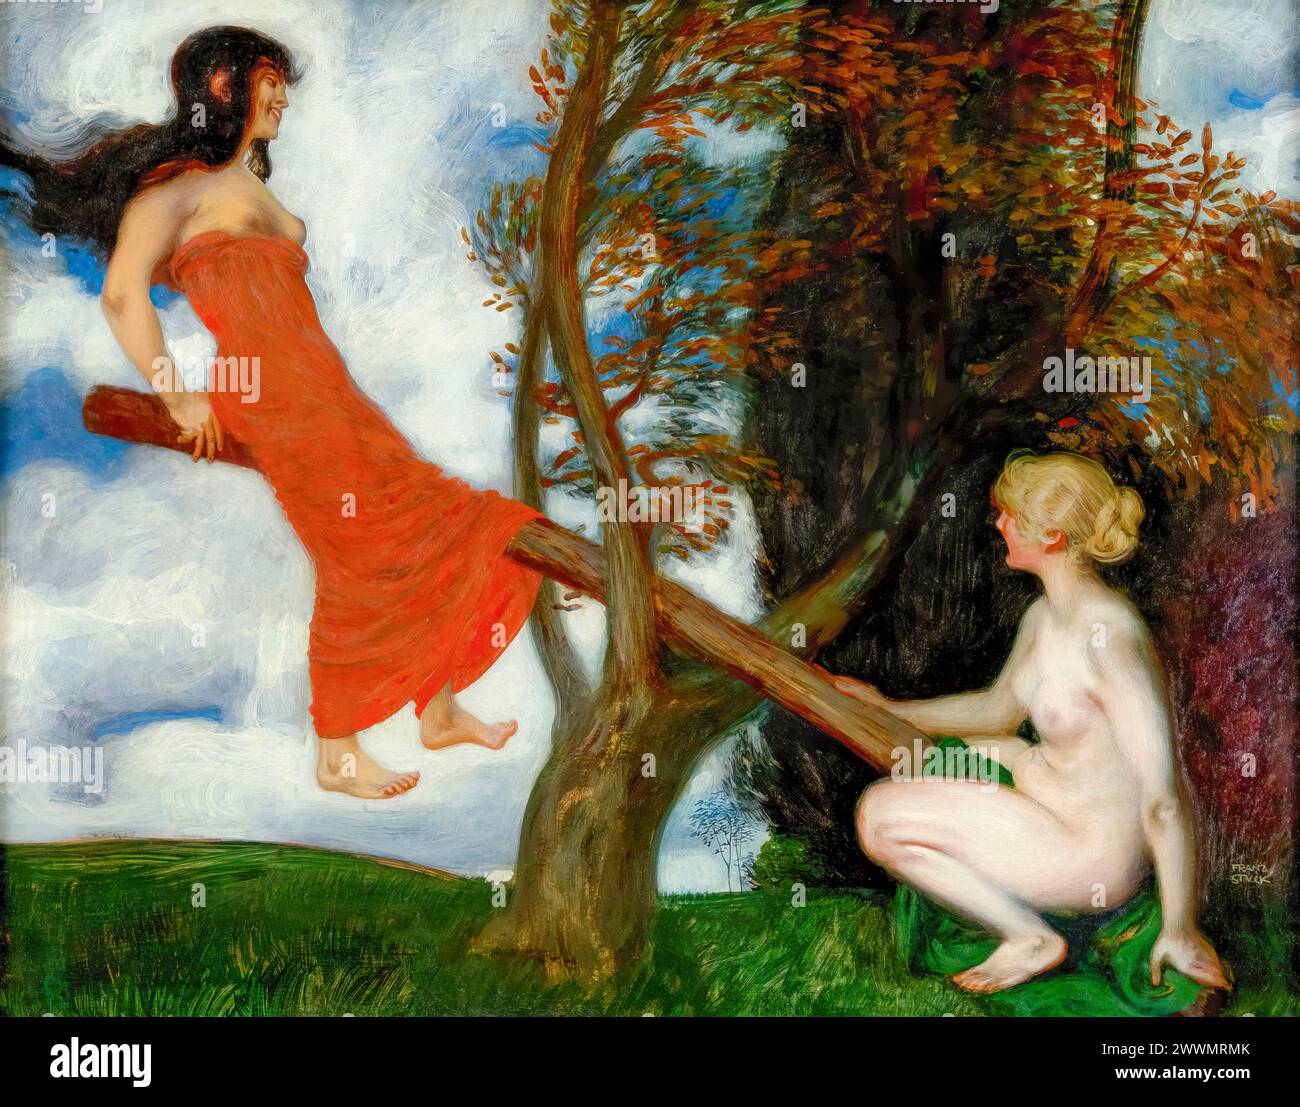 Franz von Stuck painting, The Seesaw, syntonos colors on canvas, 1898 Stock Photo